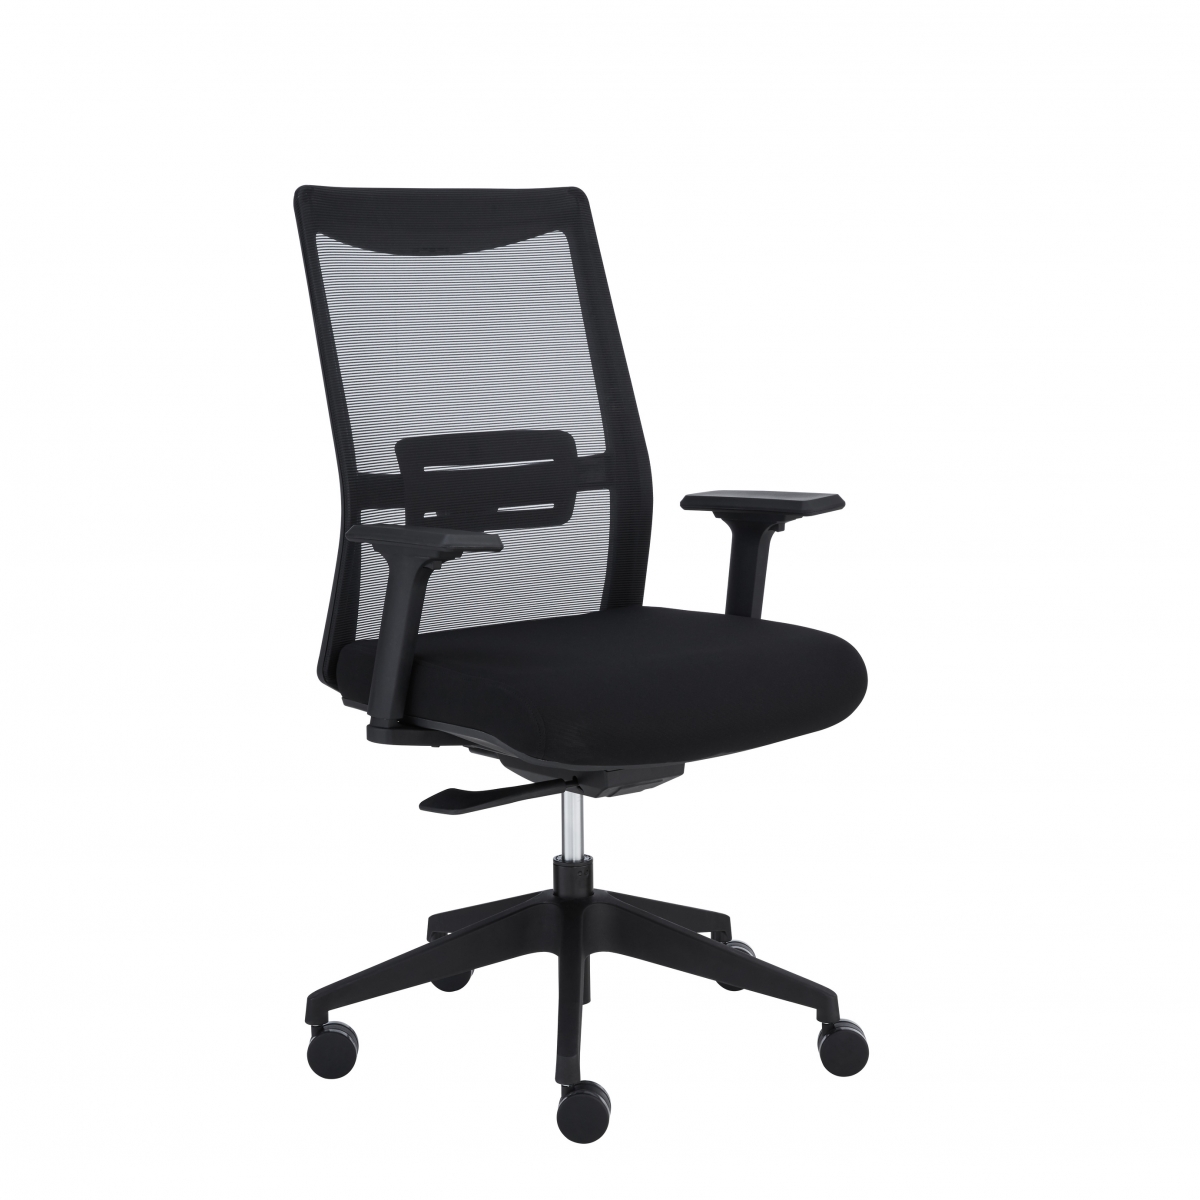 Lasse High Back office chair in black mesh and black frame shown here.